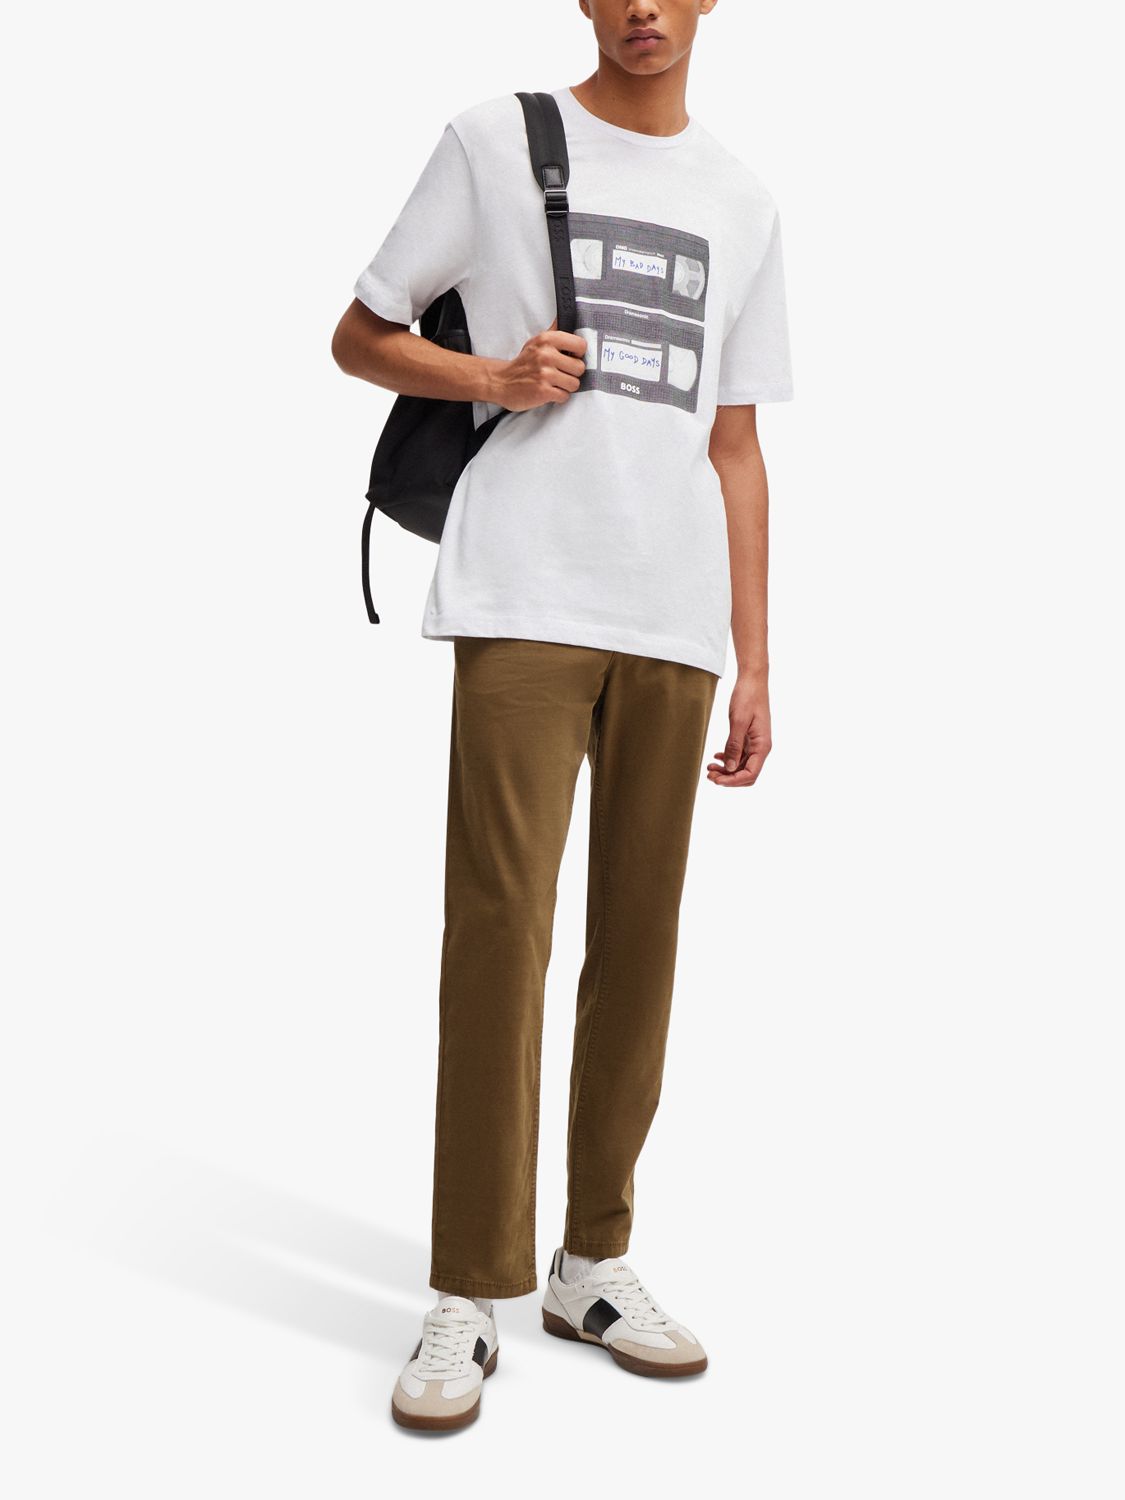 Buy BOSS Tapered Chinos, Green Online at johnlewis.com